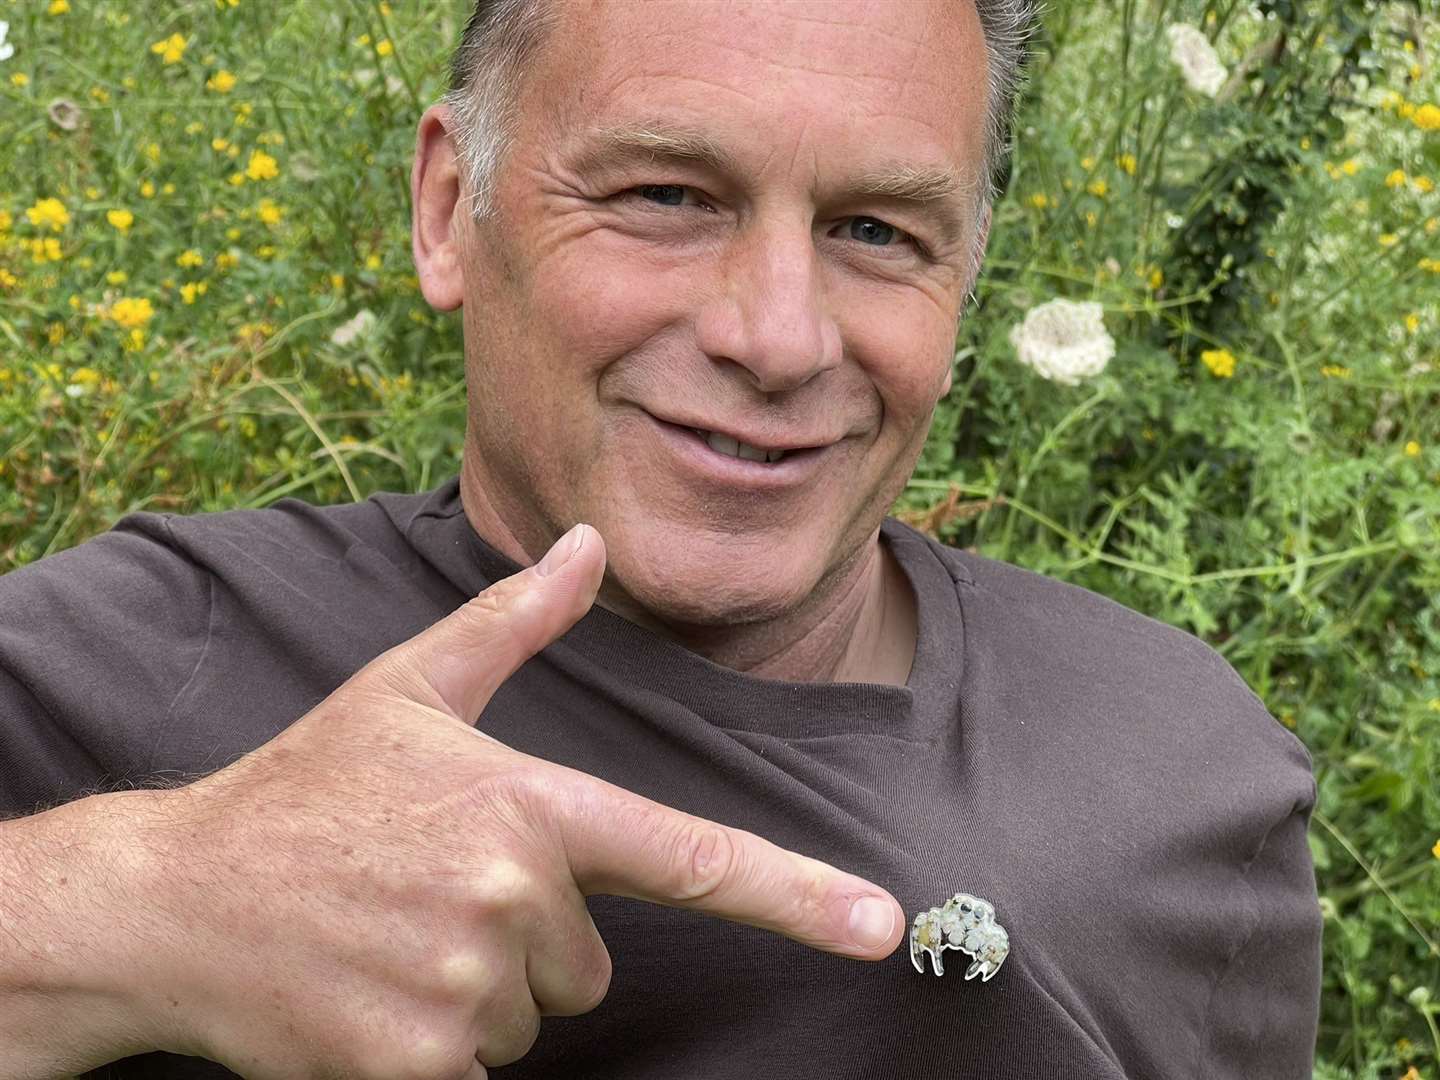 Chris Packham has tweeted his support to save the Swanscombe Marshes. Picture: Chris Packham / Twitter